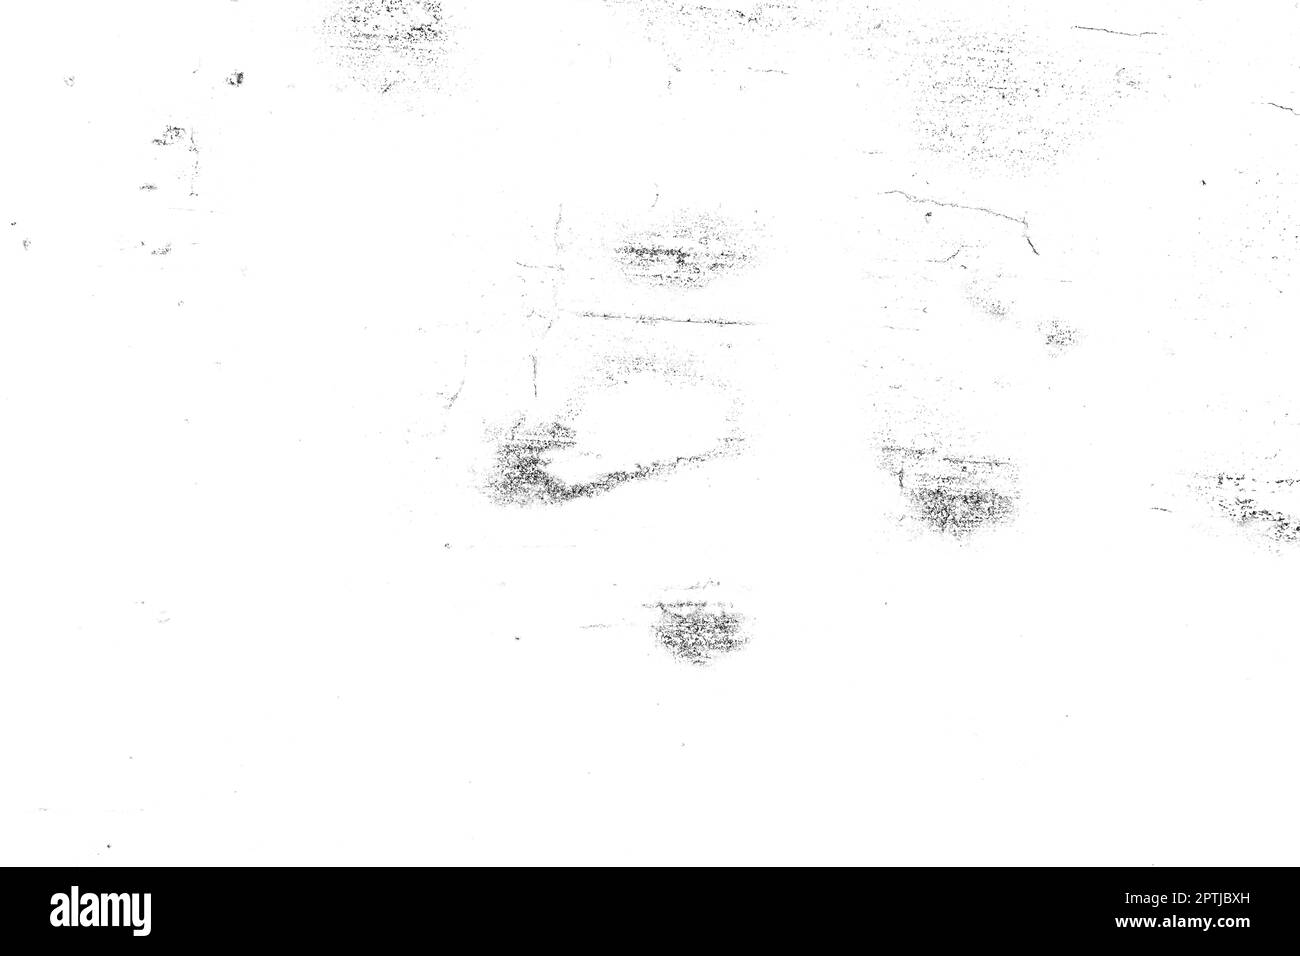 Grunge texture. Distressed effect of black and white grungy. Dust overlay distress grain, simply place illustration Stock Photo